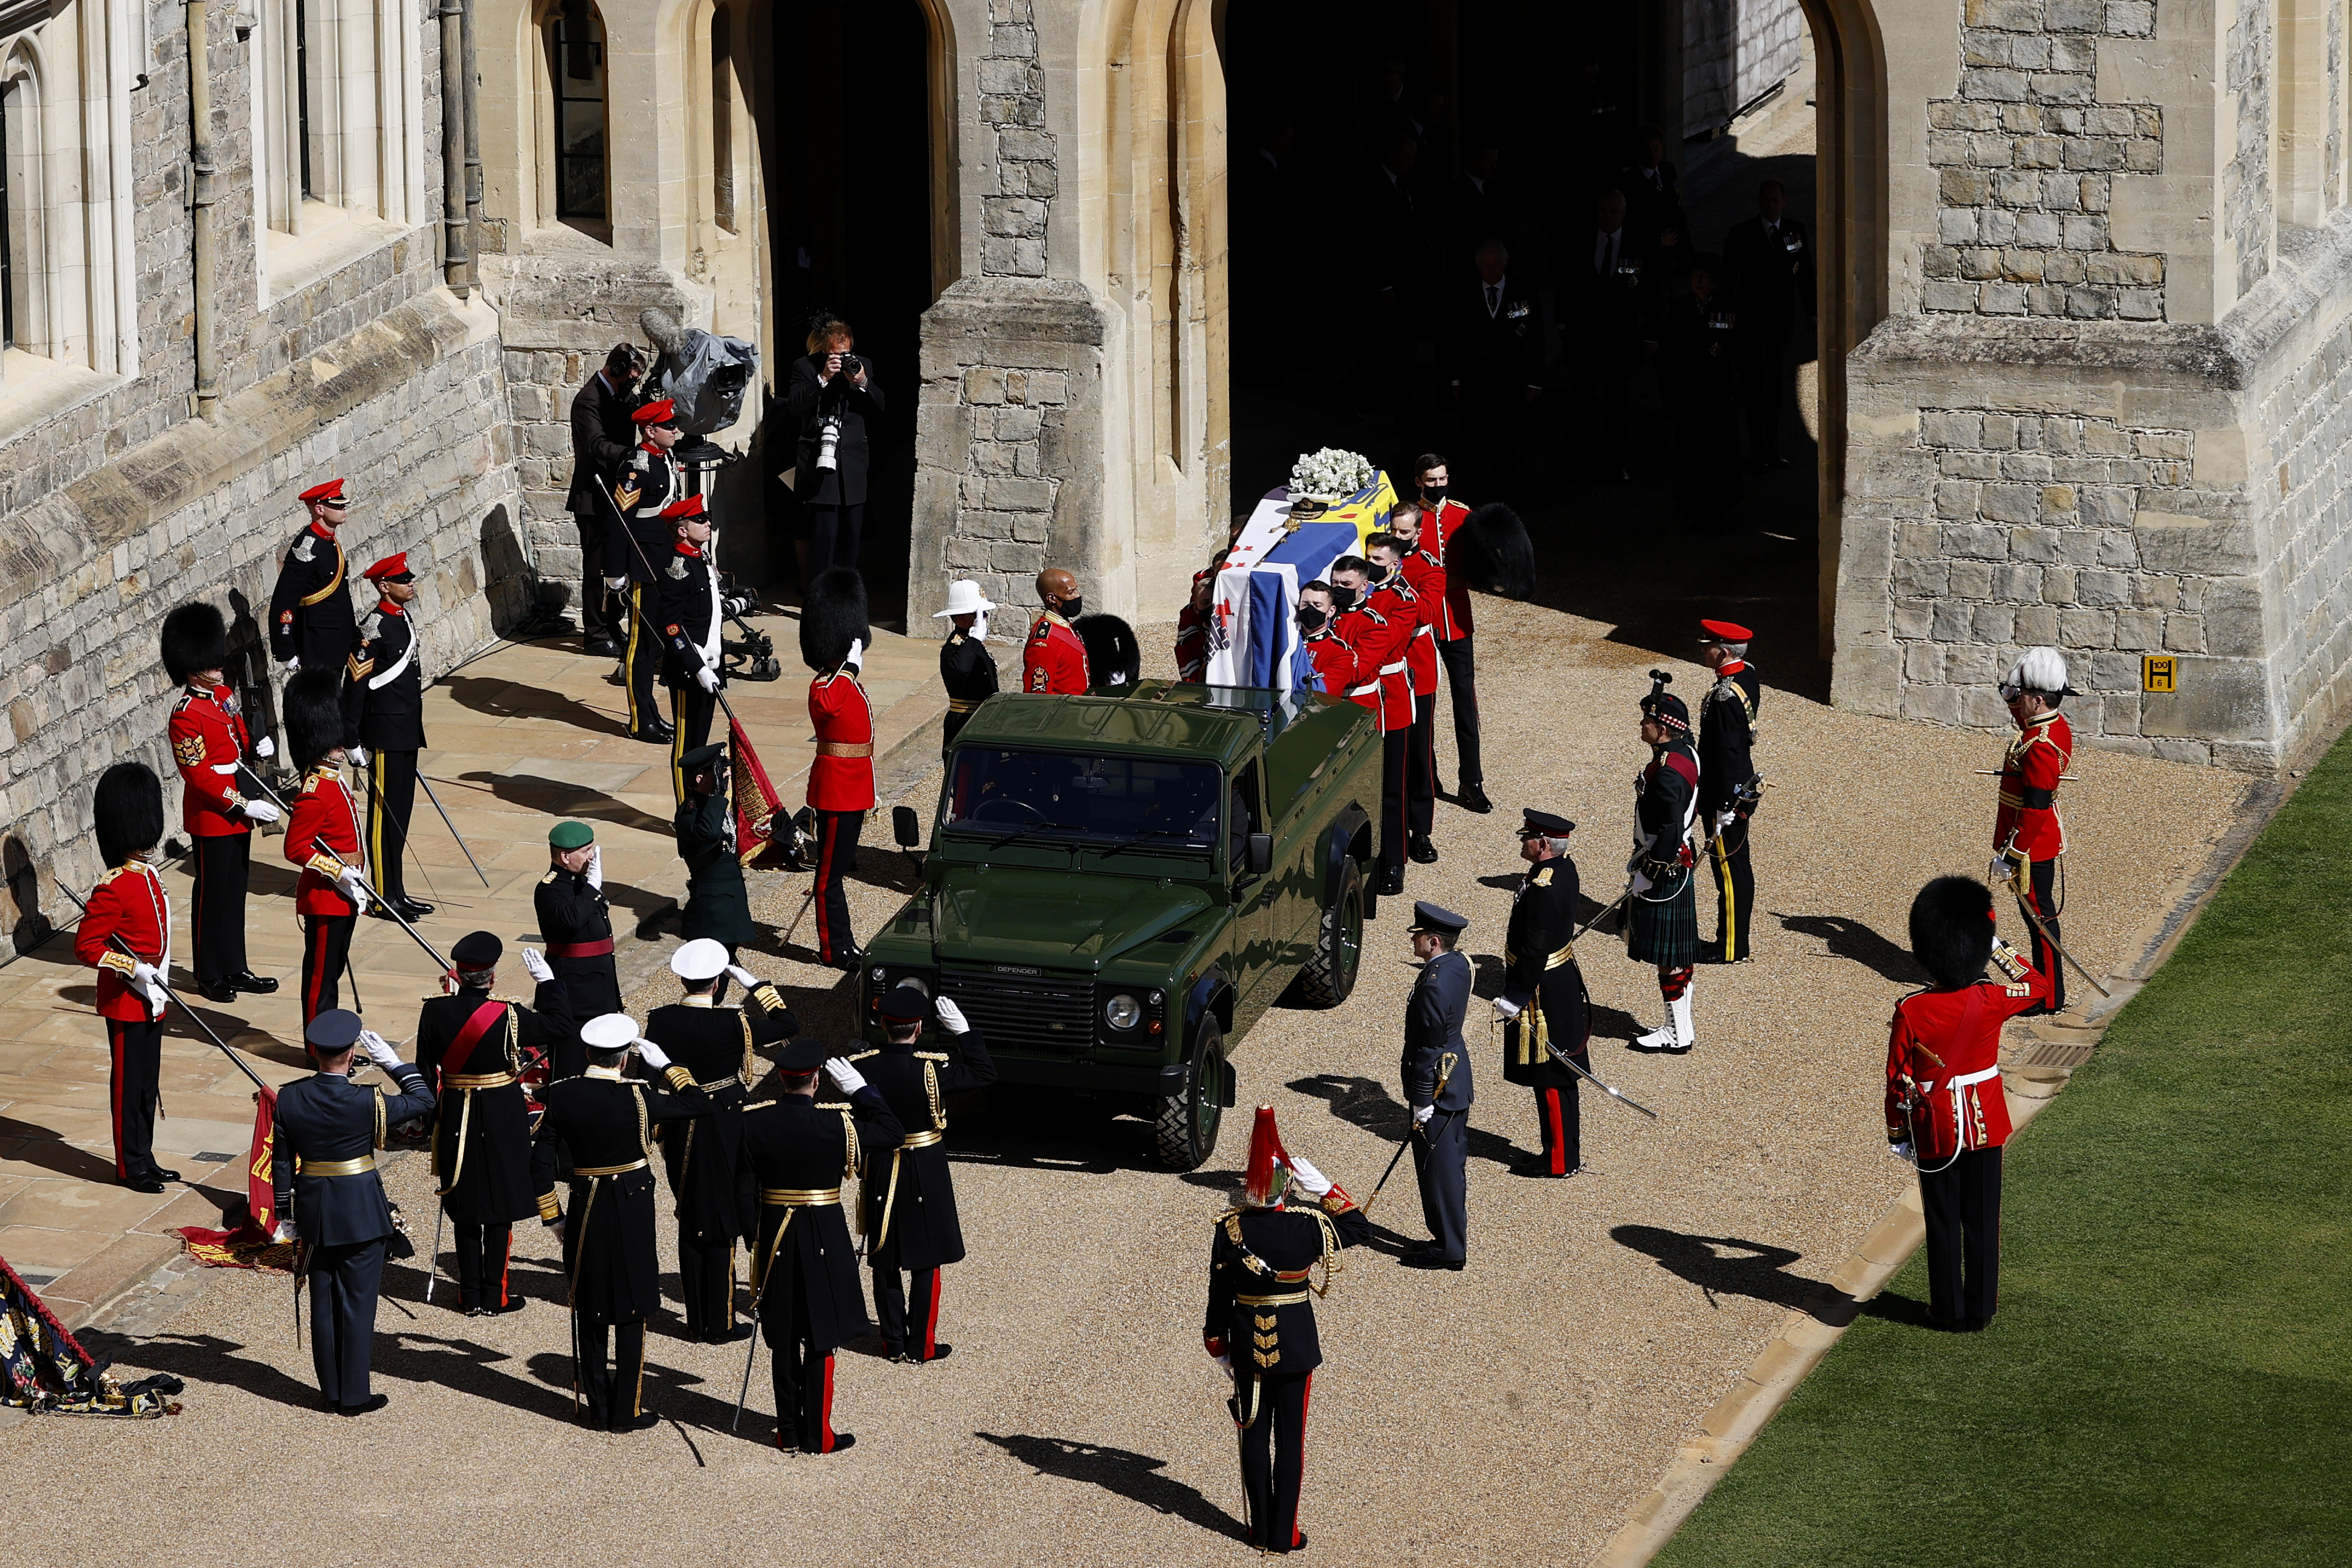 The Duke of Edinburgh’s coffin is carried to the purpose built Land Rover during the funeral.